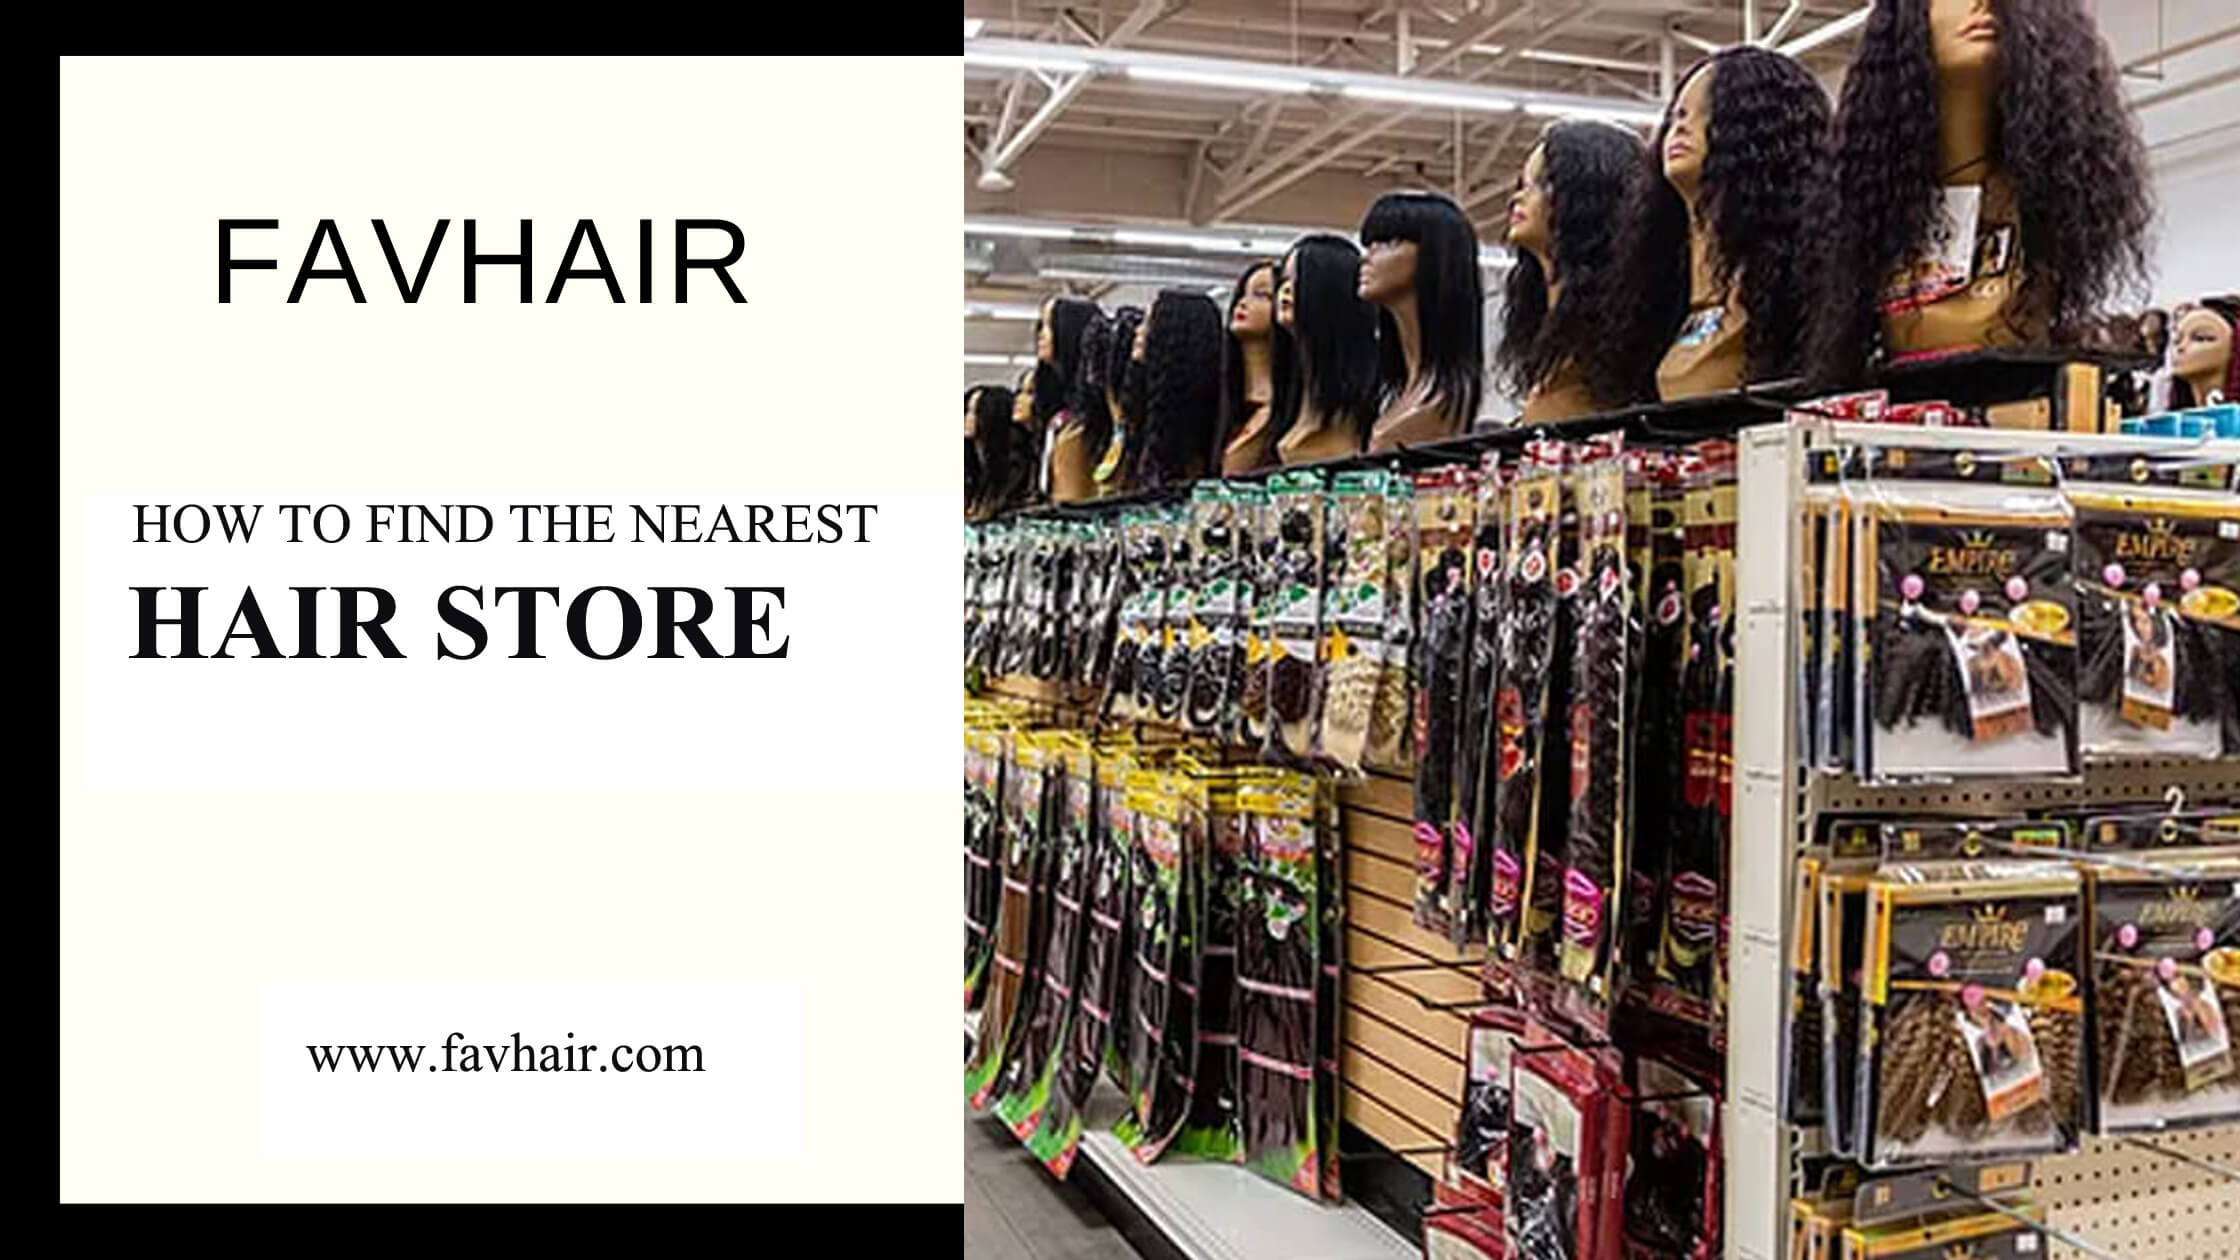 Hair Stores Near Me HAIR STORE NEAR ME-HOW TO FIND THE NEAREST HAIR STORE – FAVHAIR